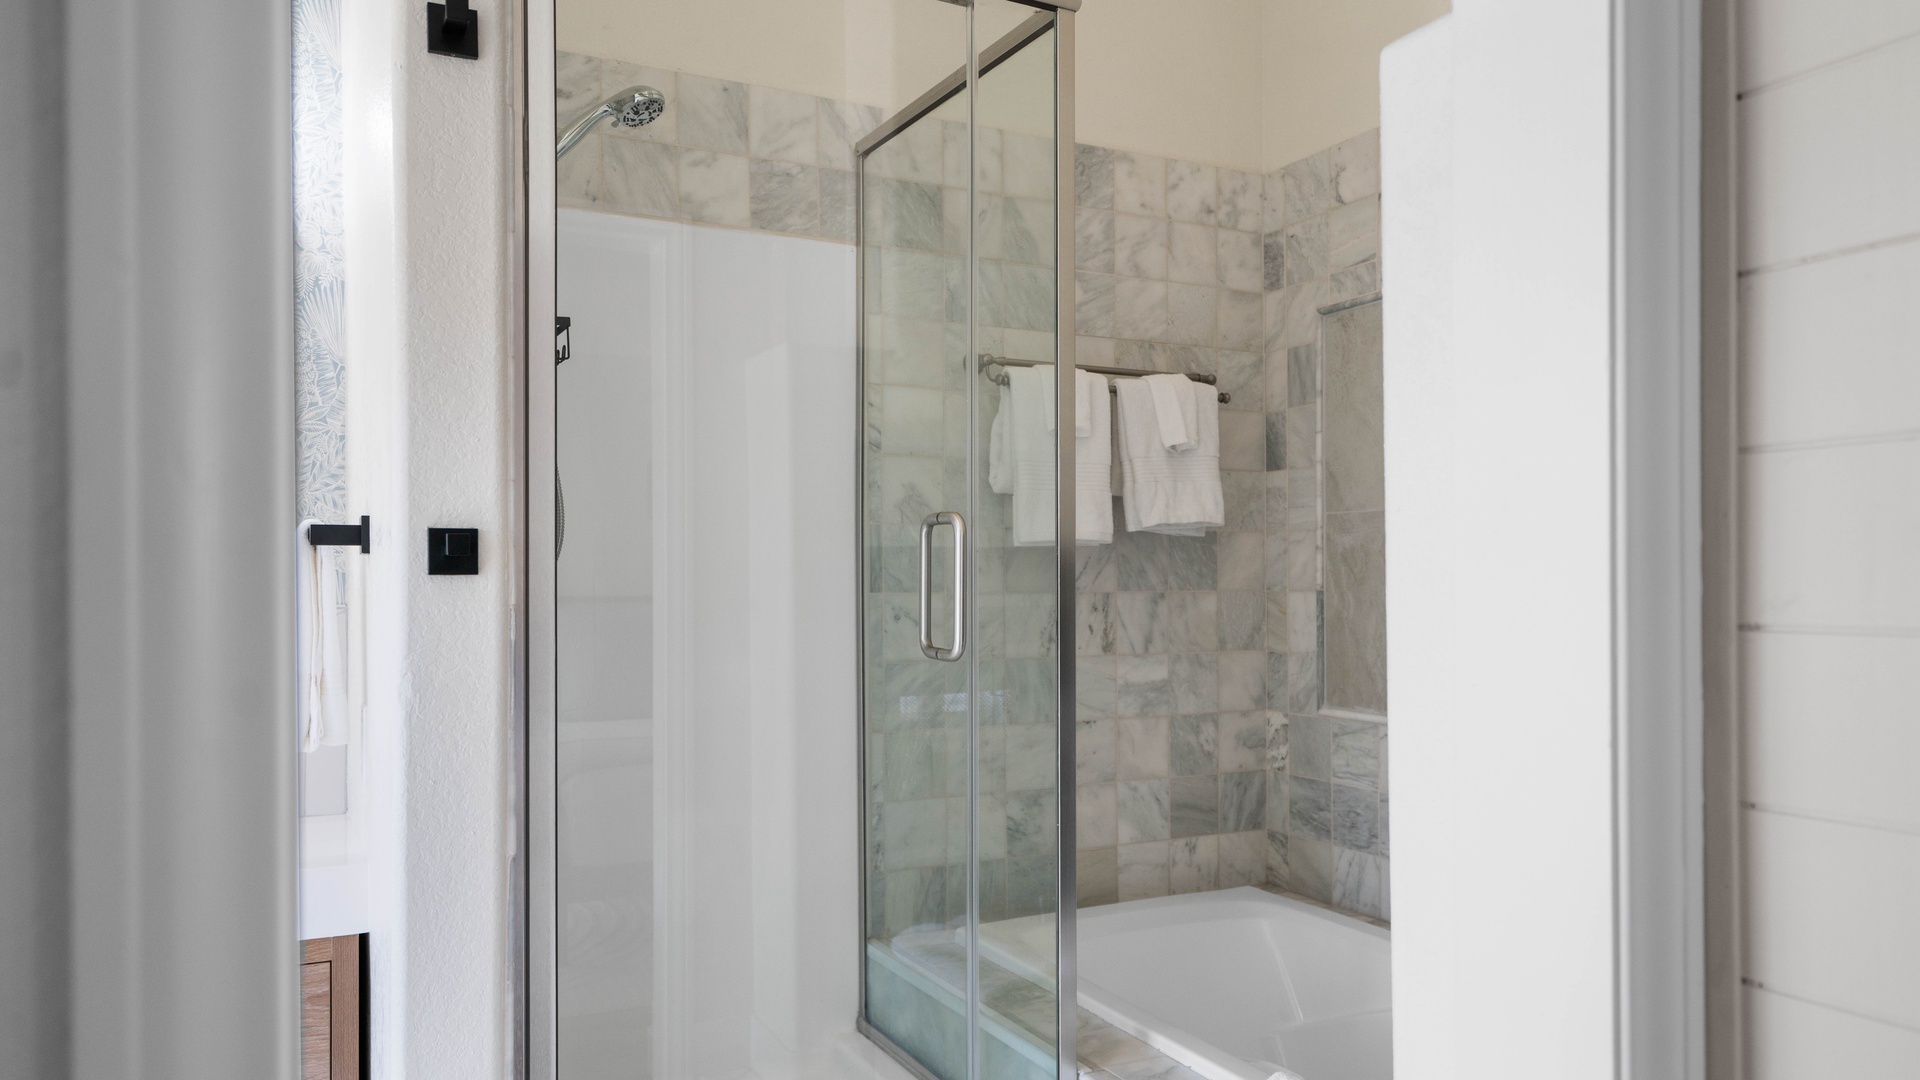 Primary Bedroom ensuite bathroom featuring a walk-in shower and soaking tub with see through fireplace